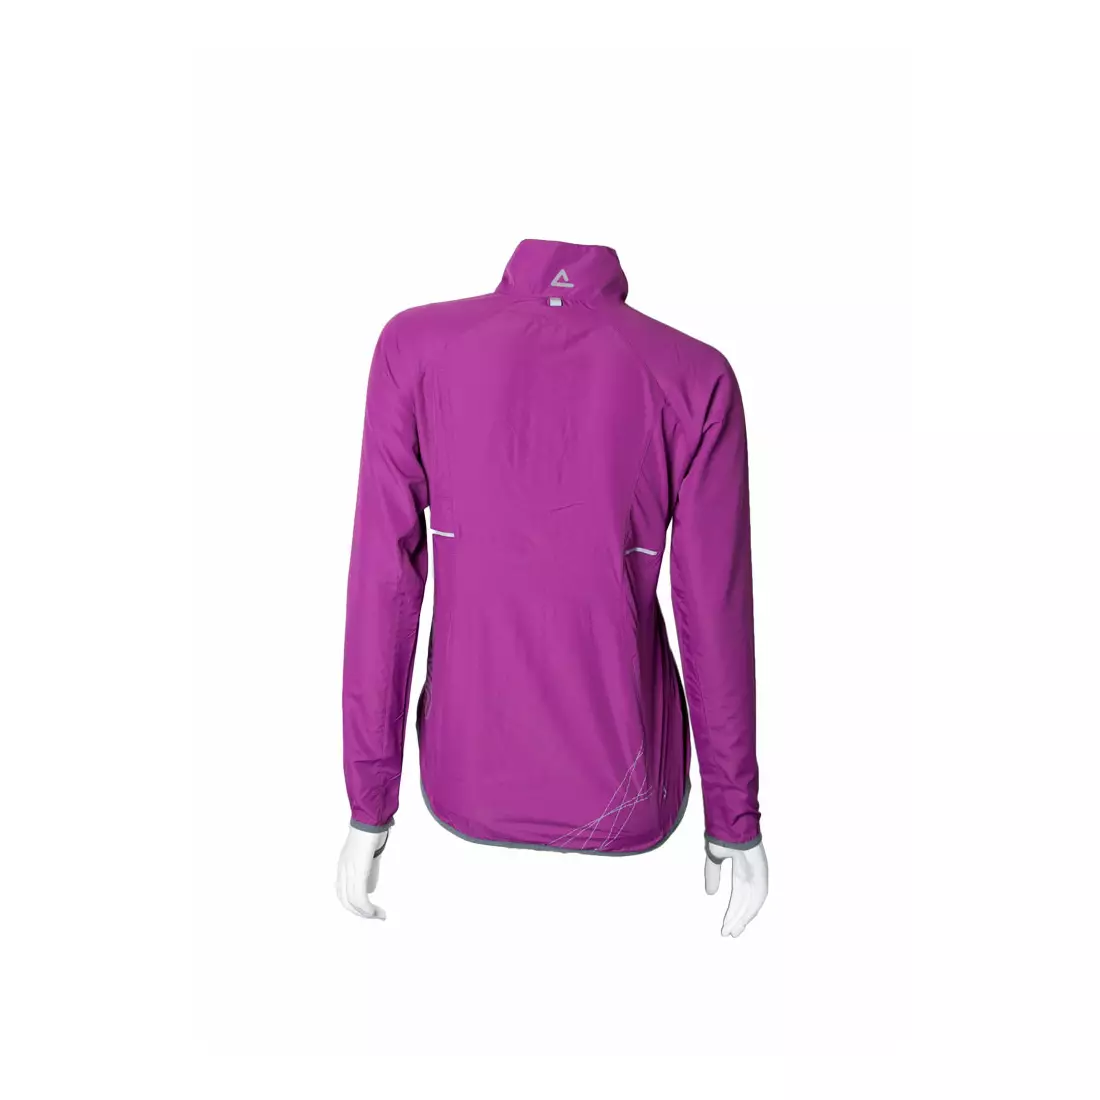 DARE 2B - RUSHED WINDSHELL DWL072 - women's cycling jacket, color: Purple